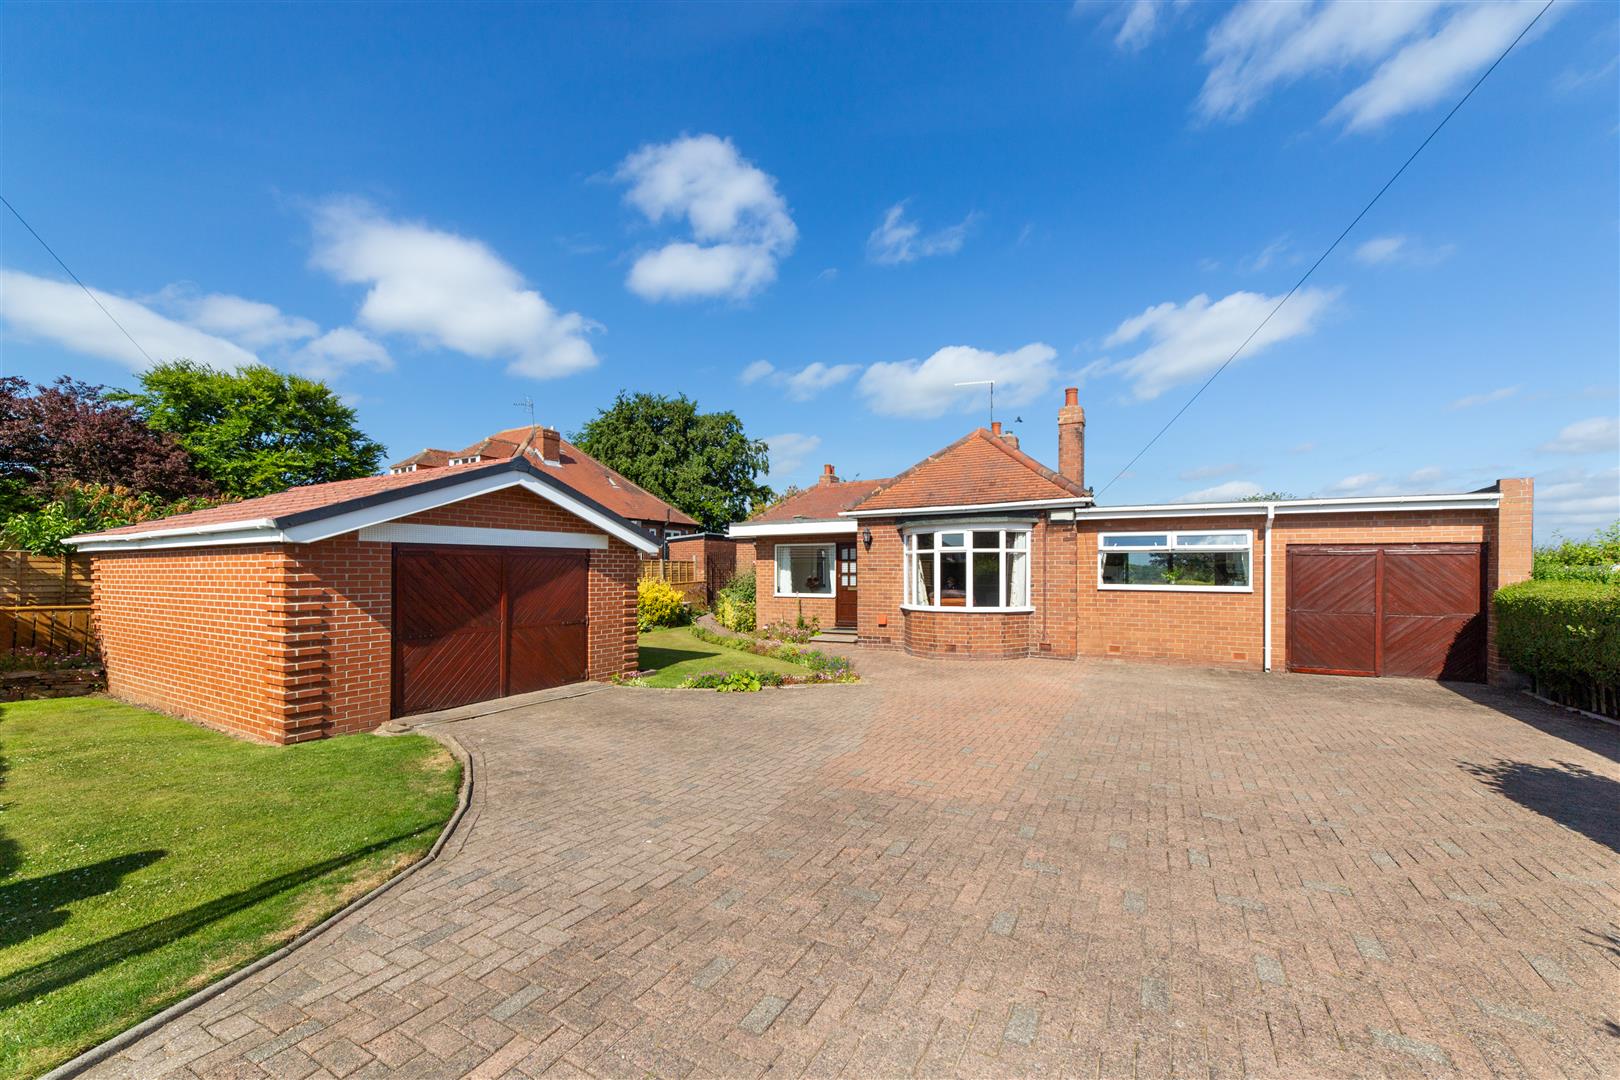 3 bed detached bungalow for sale in Station Road, Kenton Bank Foot 0